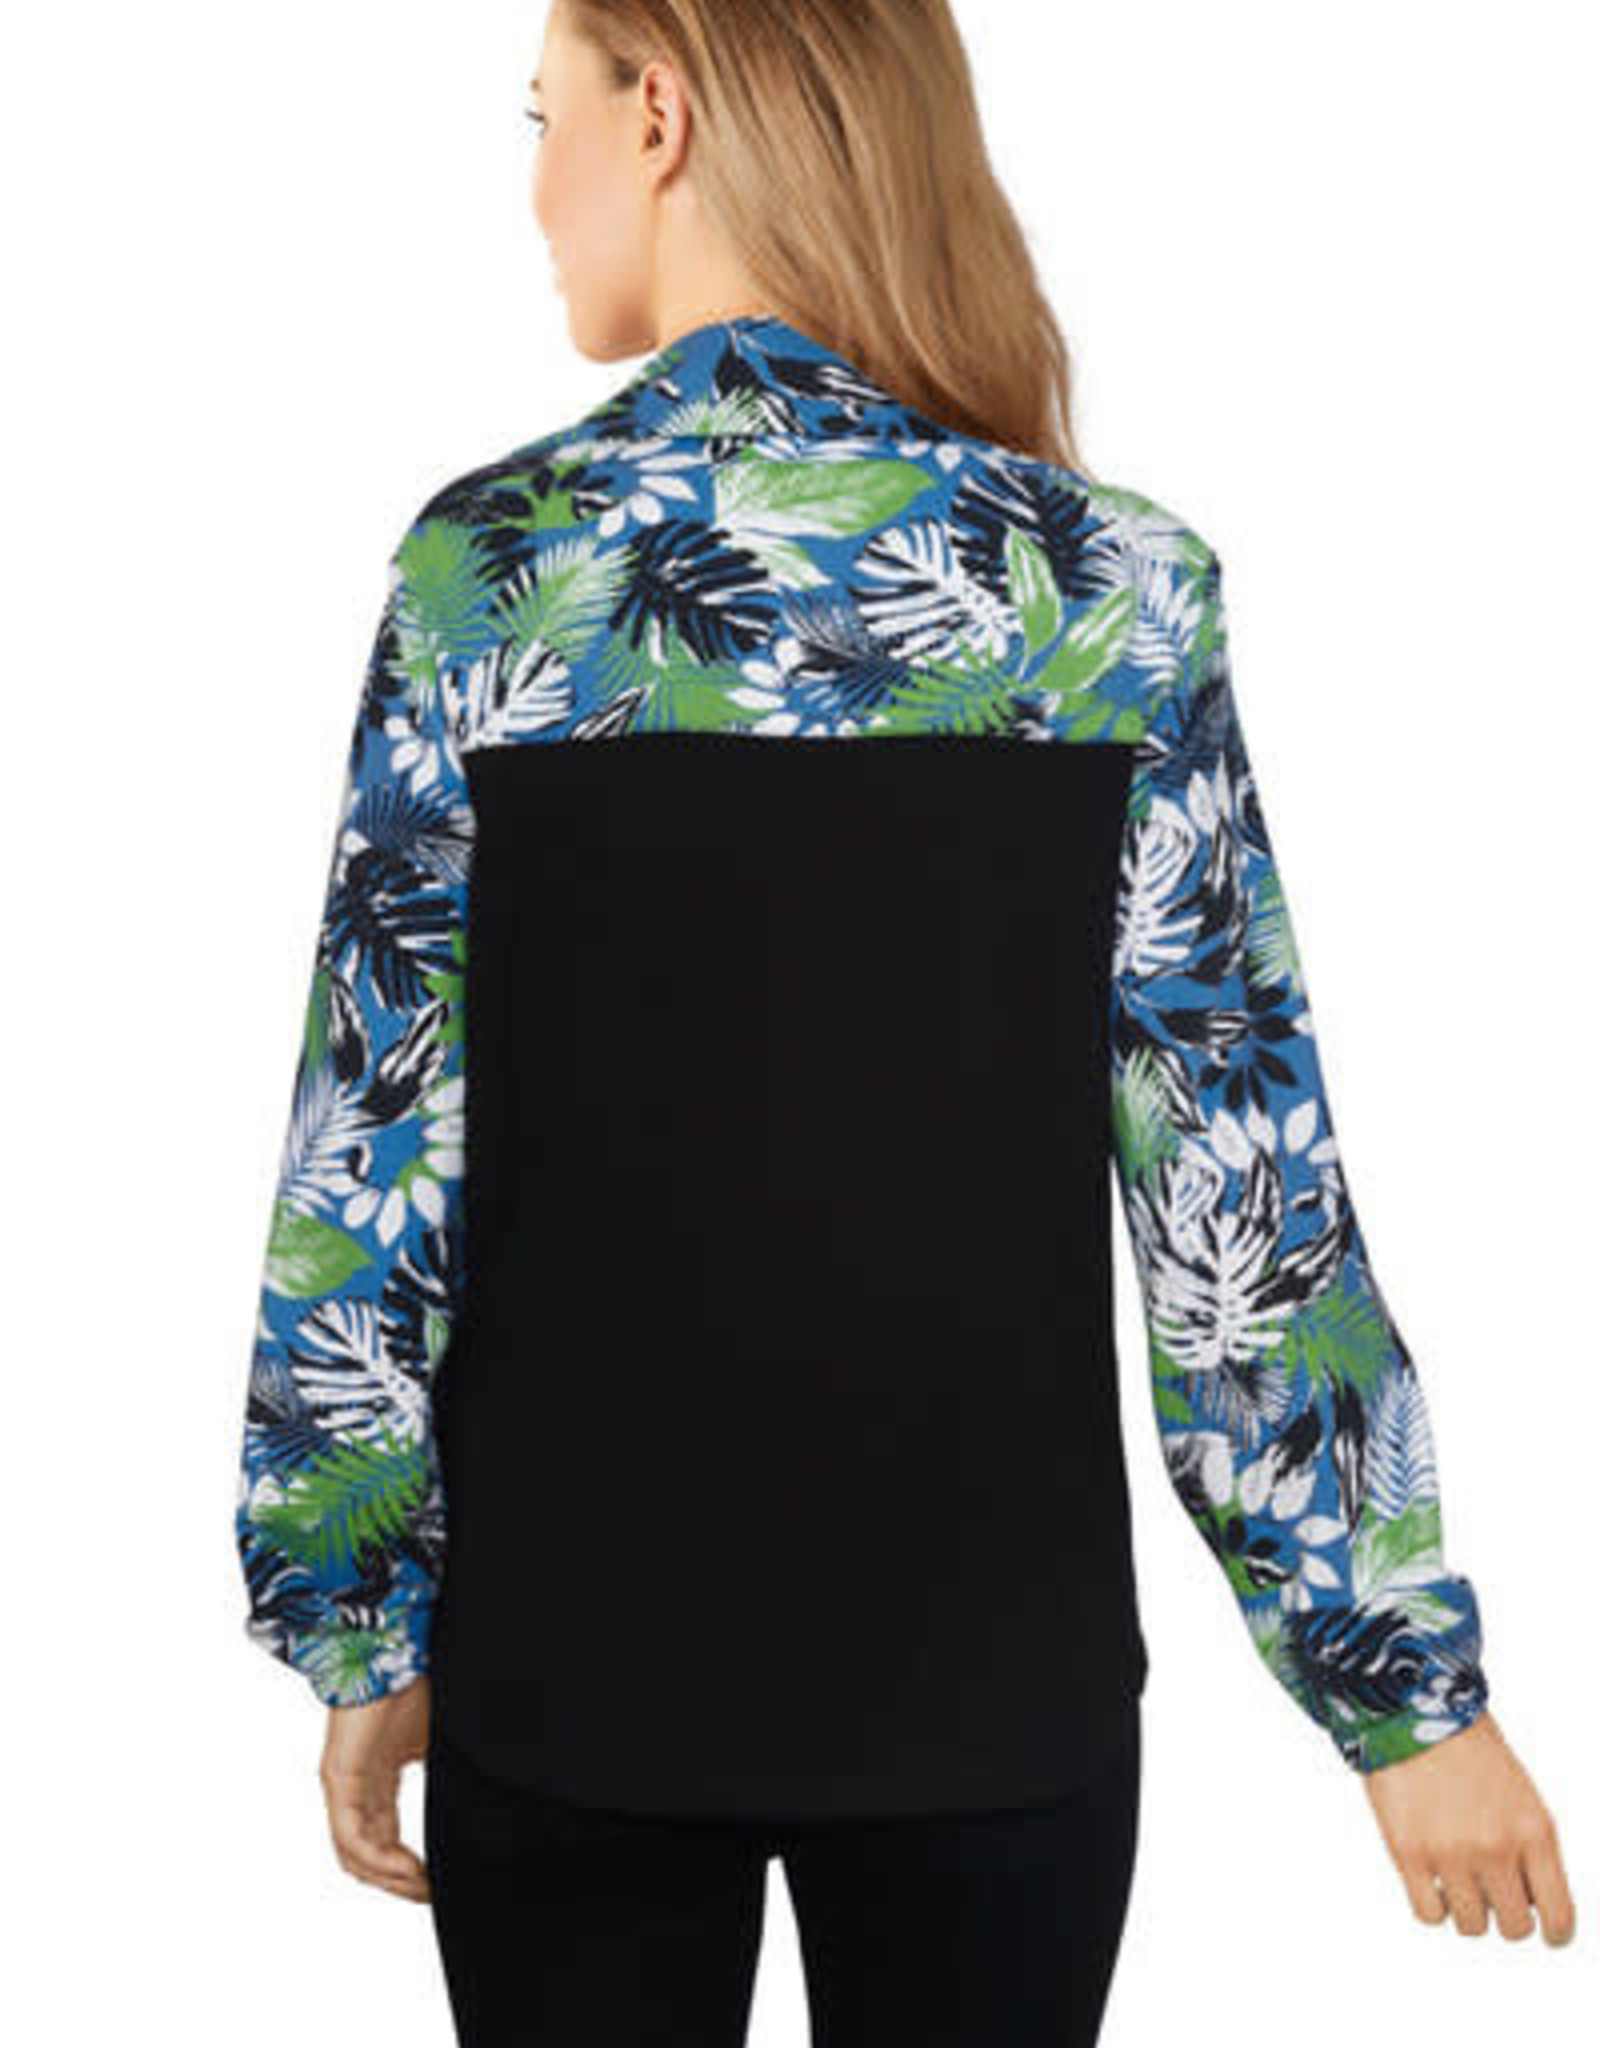 - Black/Multi Graphic Printed Foliage French Terry Zip Up Jacket